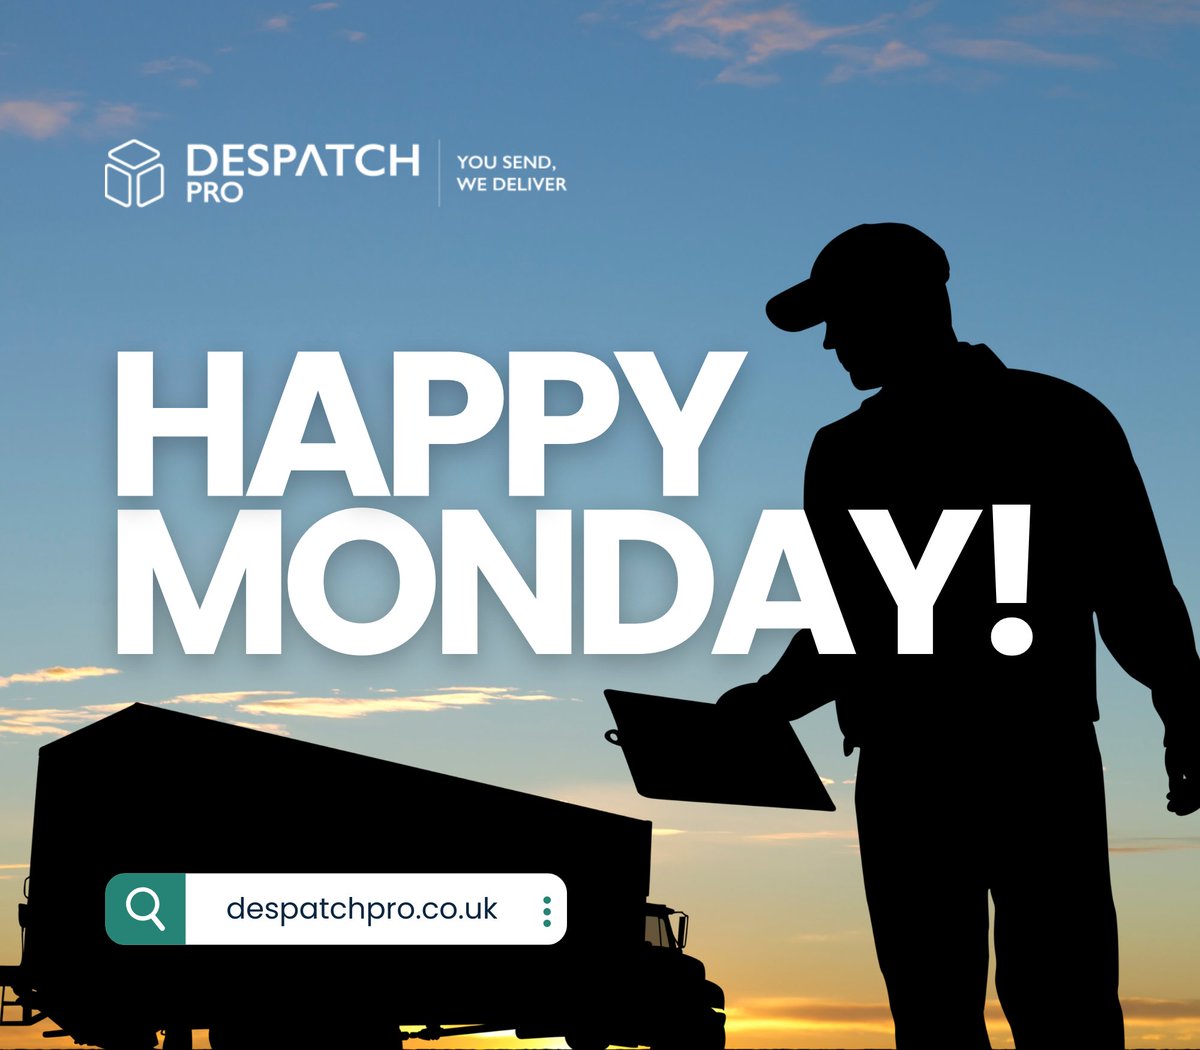 👋Good Monday morning, UK! 

We geared up for another week of delivering smiles and promises. 

Let's make your #Monday's special with our reliable and swift delivery services. 

Start your week right with us! 🚚💨

#MondayMood #UKBizLunch